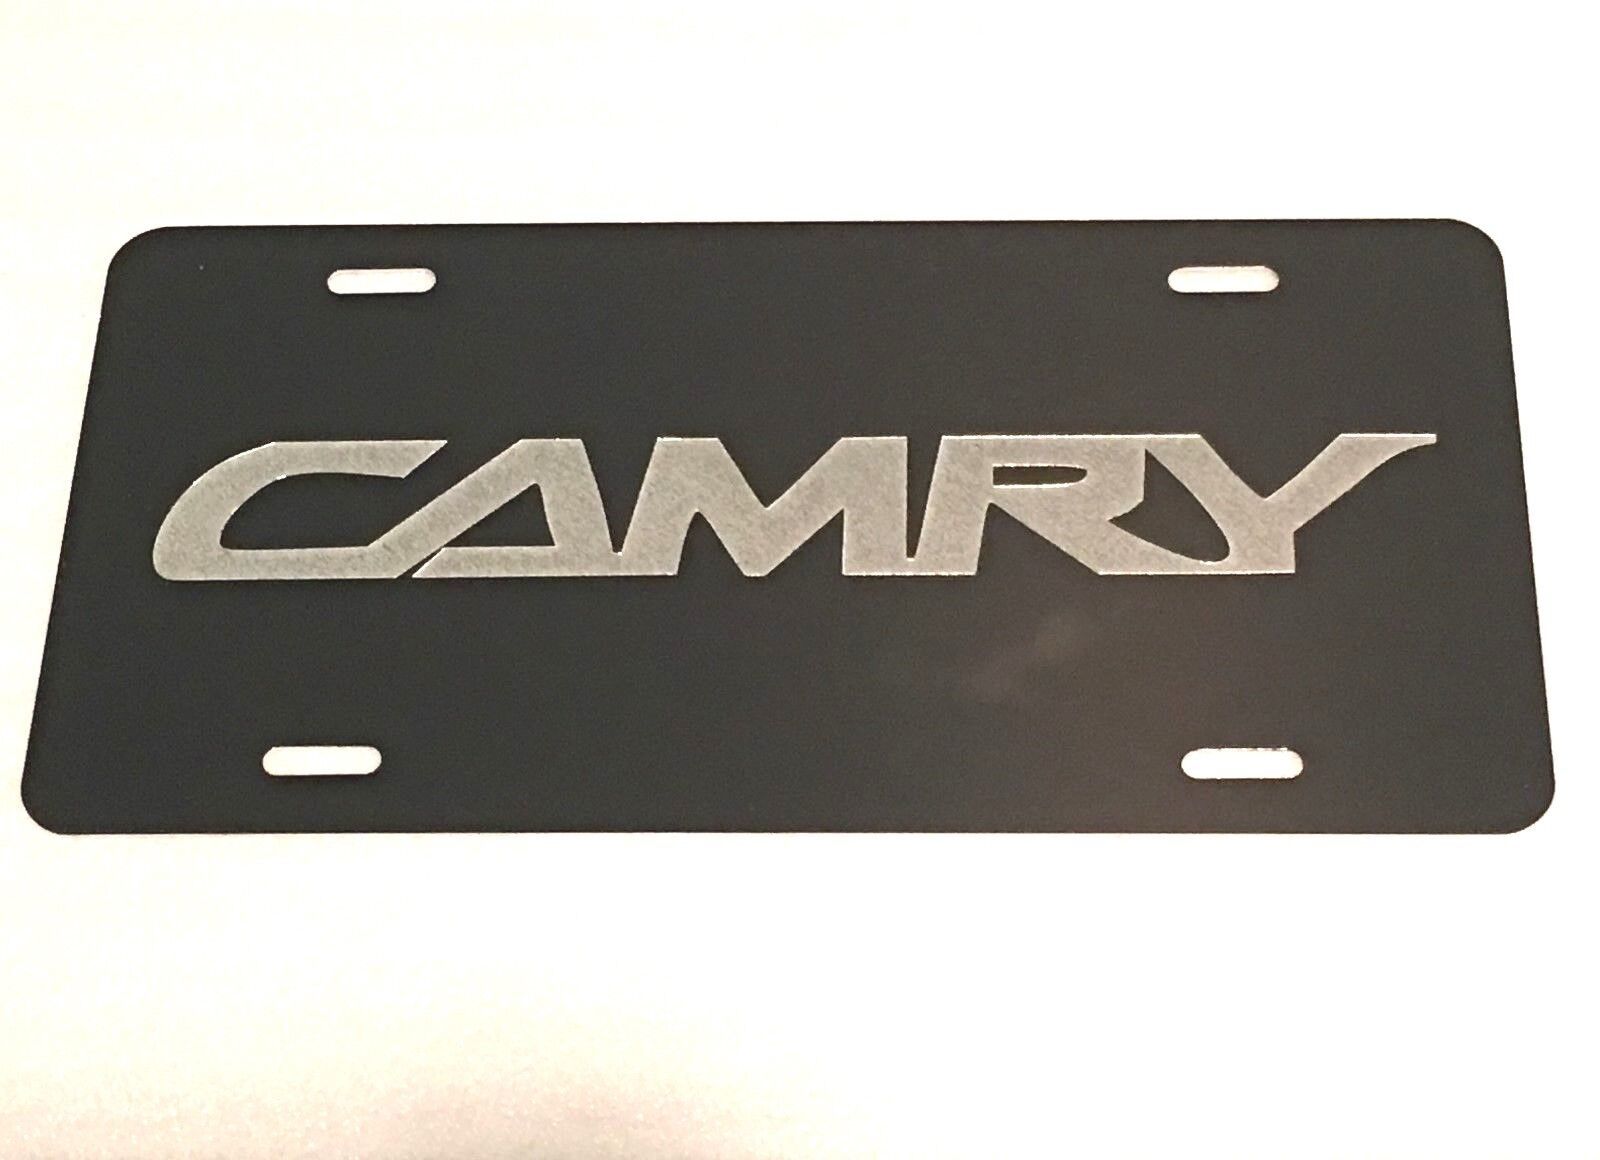 DEEP Engraved TOYOTA CAMRY Car Tag Diamond Etched on Aluminum License Plate